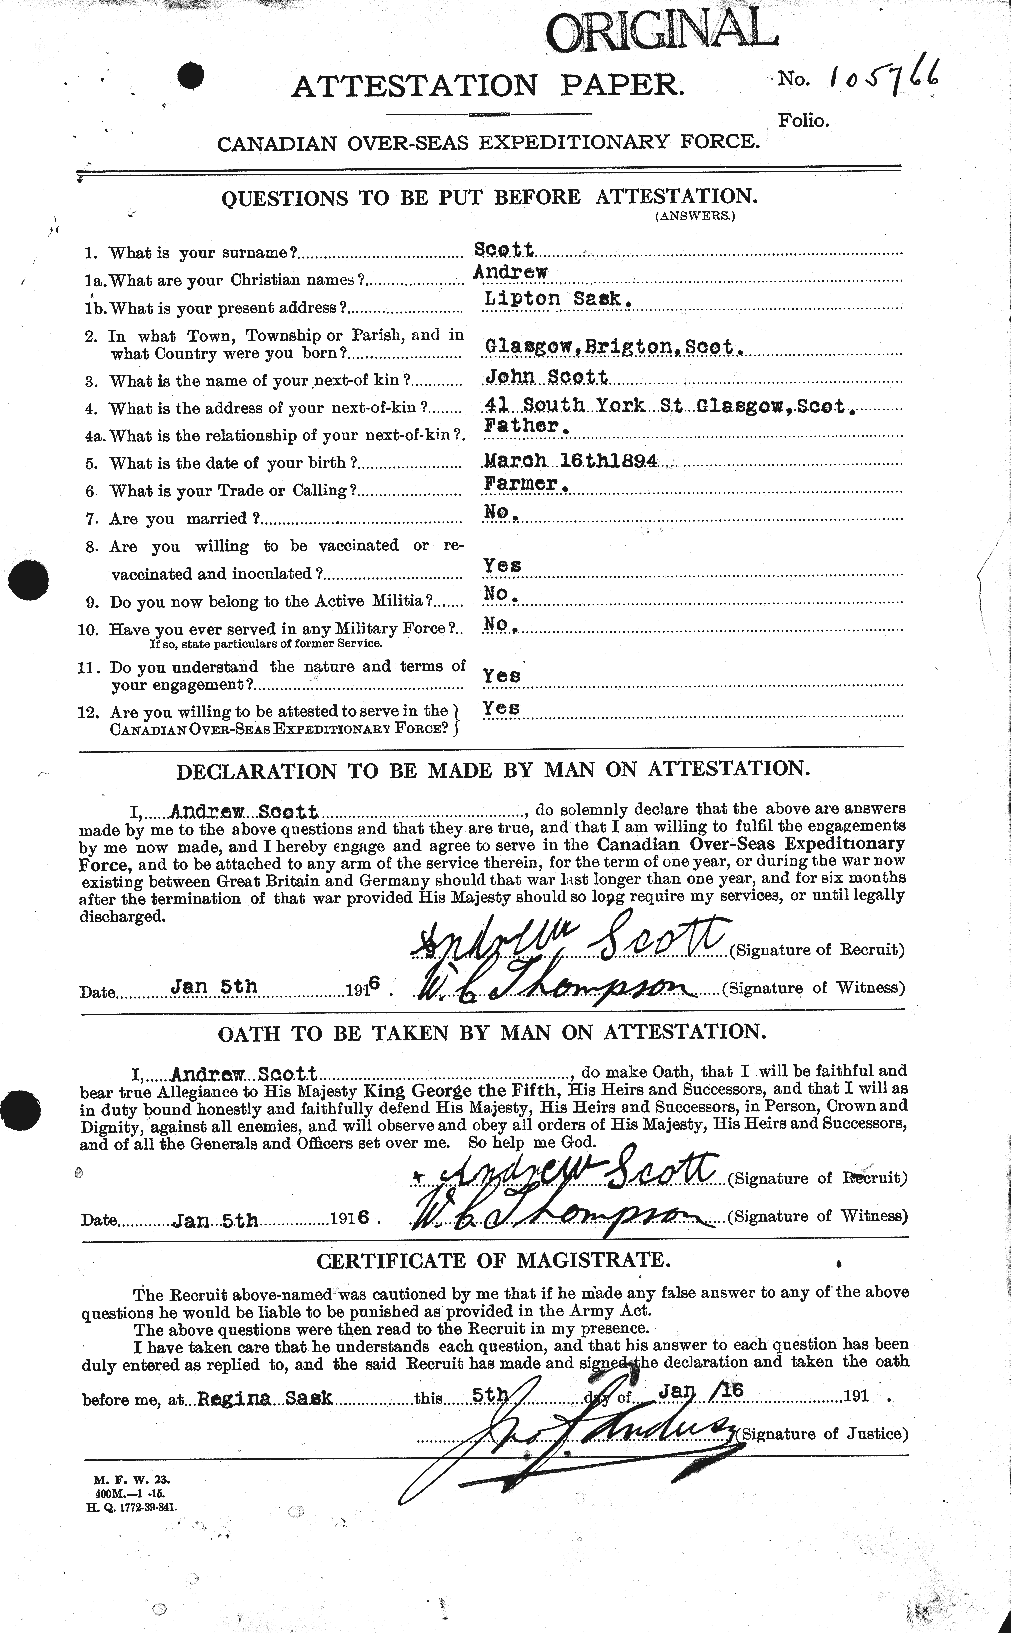 Personnel Records of the First World War - CEF 086453a